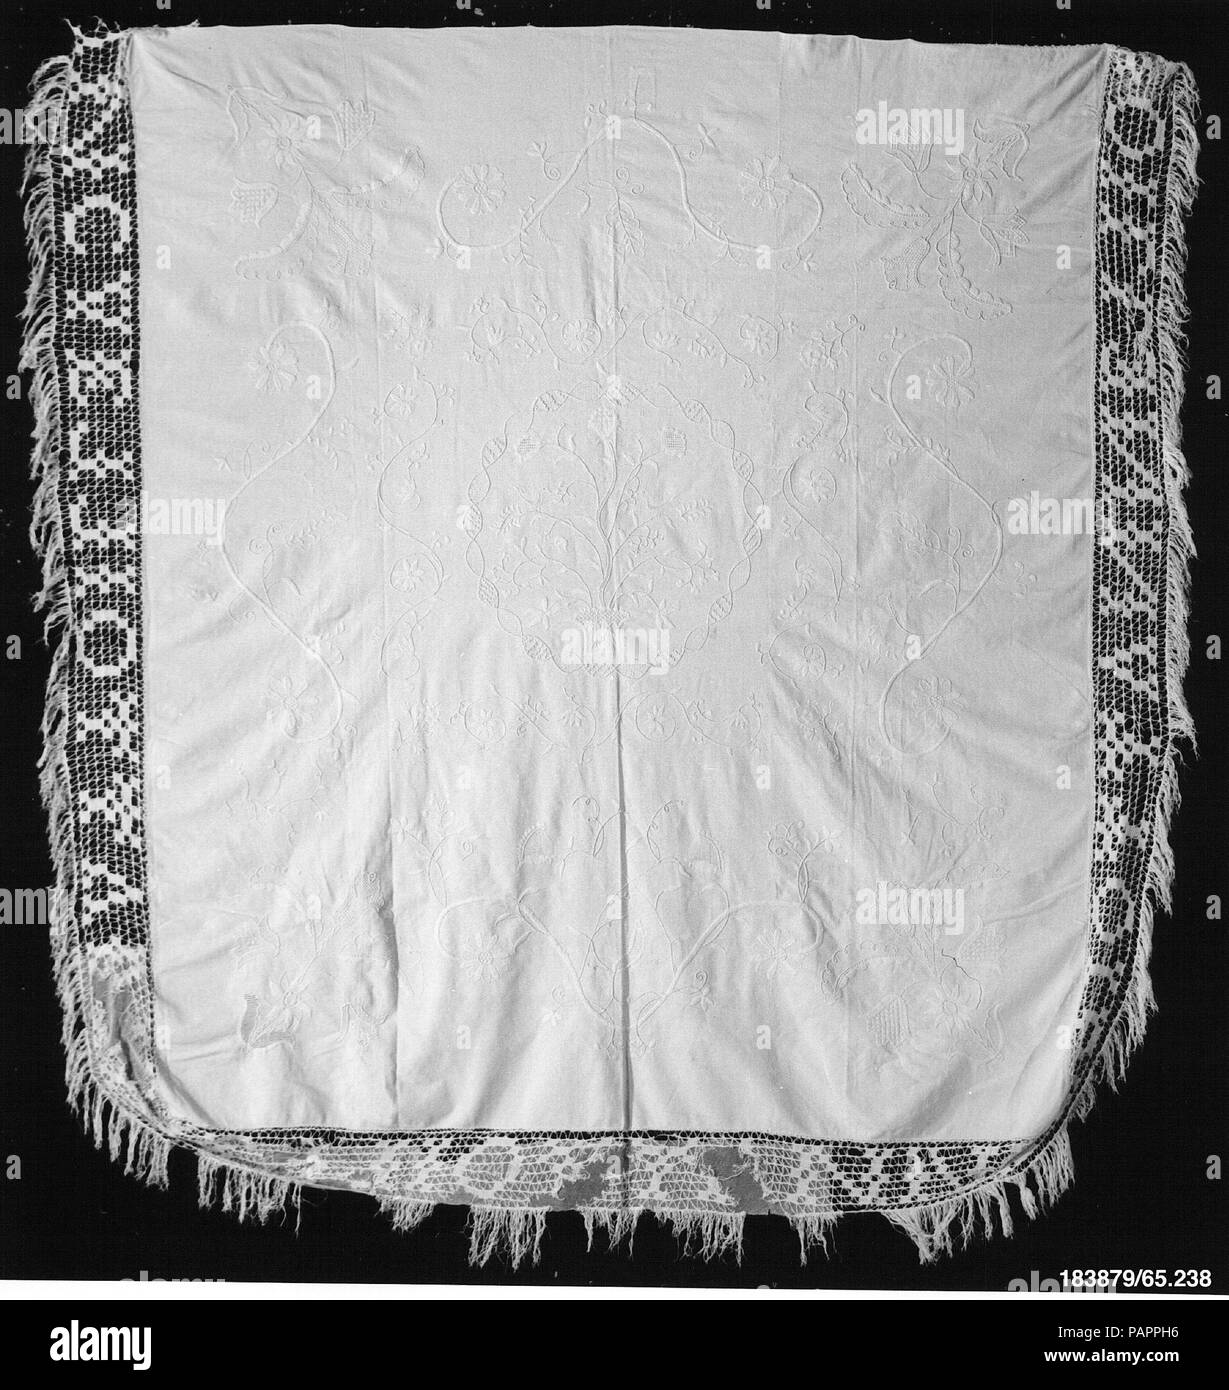 Embroidered whitework coverlet. Culture: American. Dimensions: 83 5/8 x 90 in. (212.4 x 228.6 cm). Maker: Ann (Nancy) Elliott Grigg (1795-1839). Date: 1810-15.  This whitework coverlet is made of three panels of woven cotton fabric that have been seamed together. It is embroidered with heavy white cotton thread in a variety of stitches and includes areas of drawnwork. The piece is decorated with a central basket with a flowering tree and birds, which is surrounded by a ribbon border and a wide outer border of vines and flowers. The fringe is a recent reproduction of the original. Museum: Metro Stock Photo